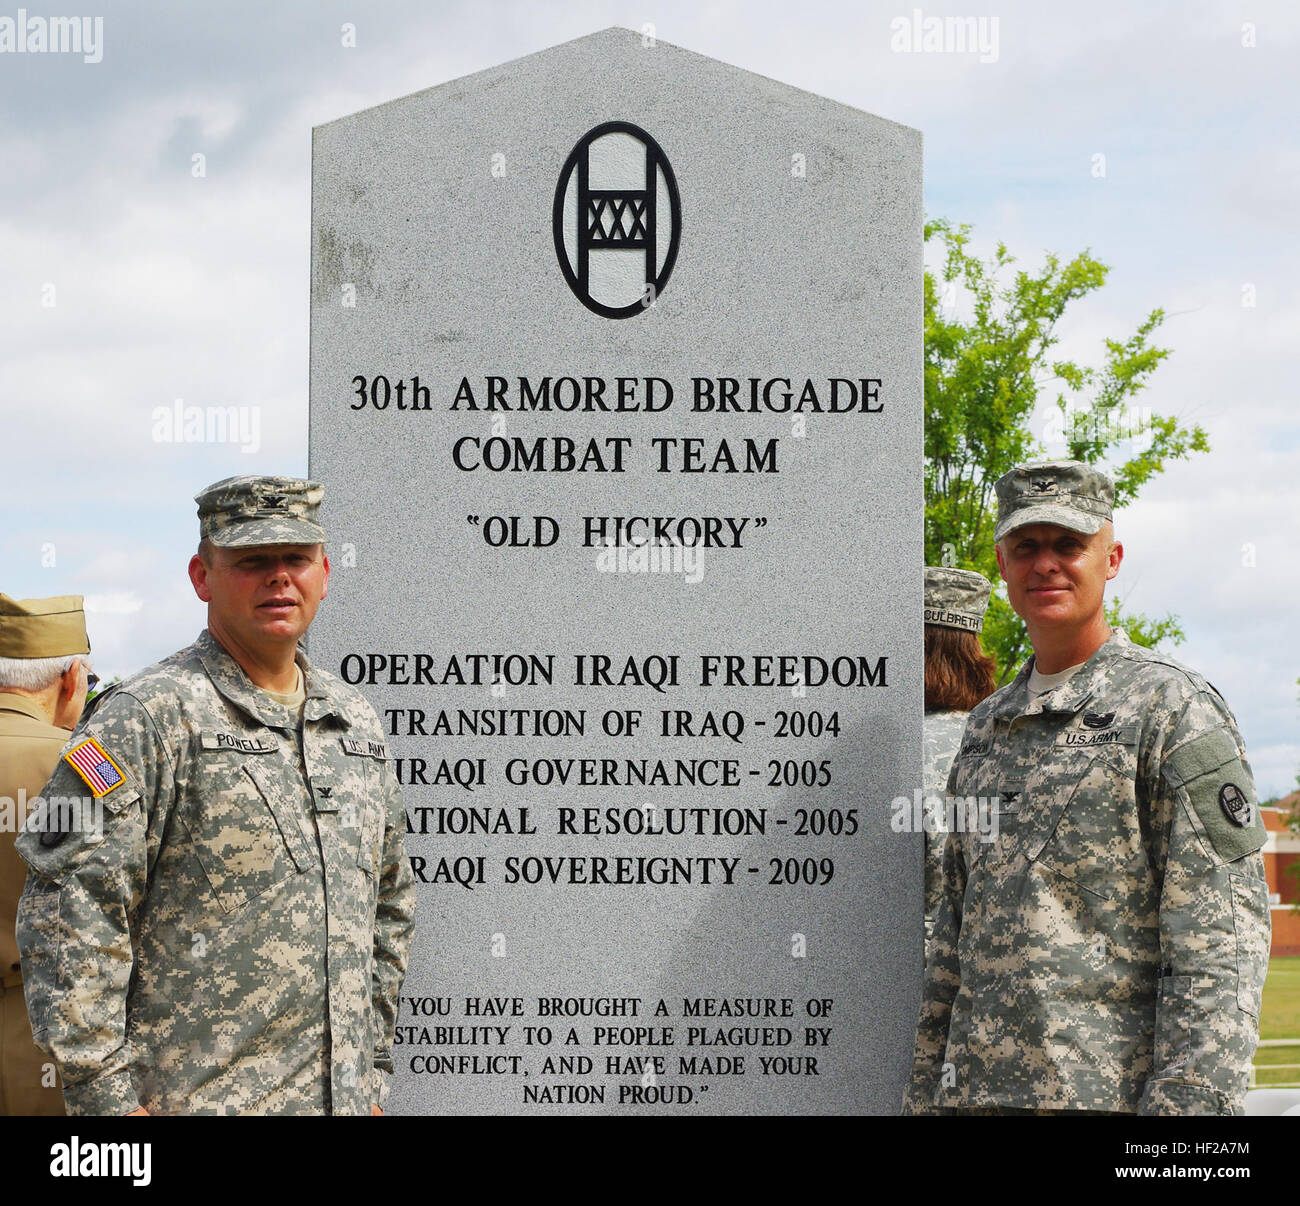 (From left to right) Commander Col. Randy Powell and Deputy Commander Col. Sonny Simpson, 30th Armored Brigade Combat Team leaders, have their picture taken at the new 30th Infantry Division and 30th ABCT monument at the National Infantry Museum Walk of Honor at Fort Benning, June 2, 2013. The two leaders were part of a host of soldiers from World War II and the modern day 30th ABCT took part in the ceremony that honored the unit for their service from past to present. The 30th ABCT deployed twice in support of Operation Iraqi Freedom, serving in 2004 in the Diyala Province and again in 2009 n Stock Photo